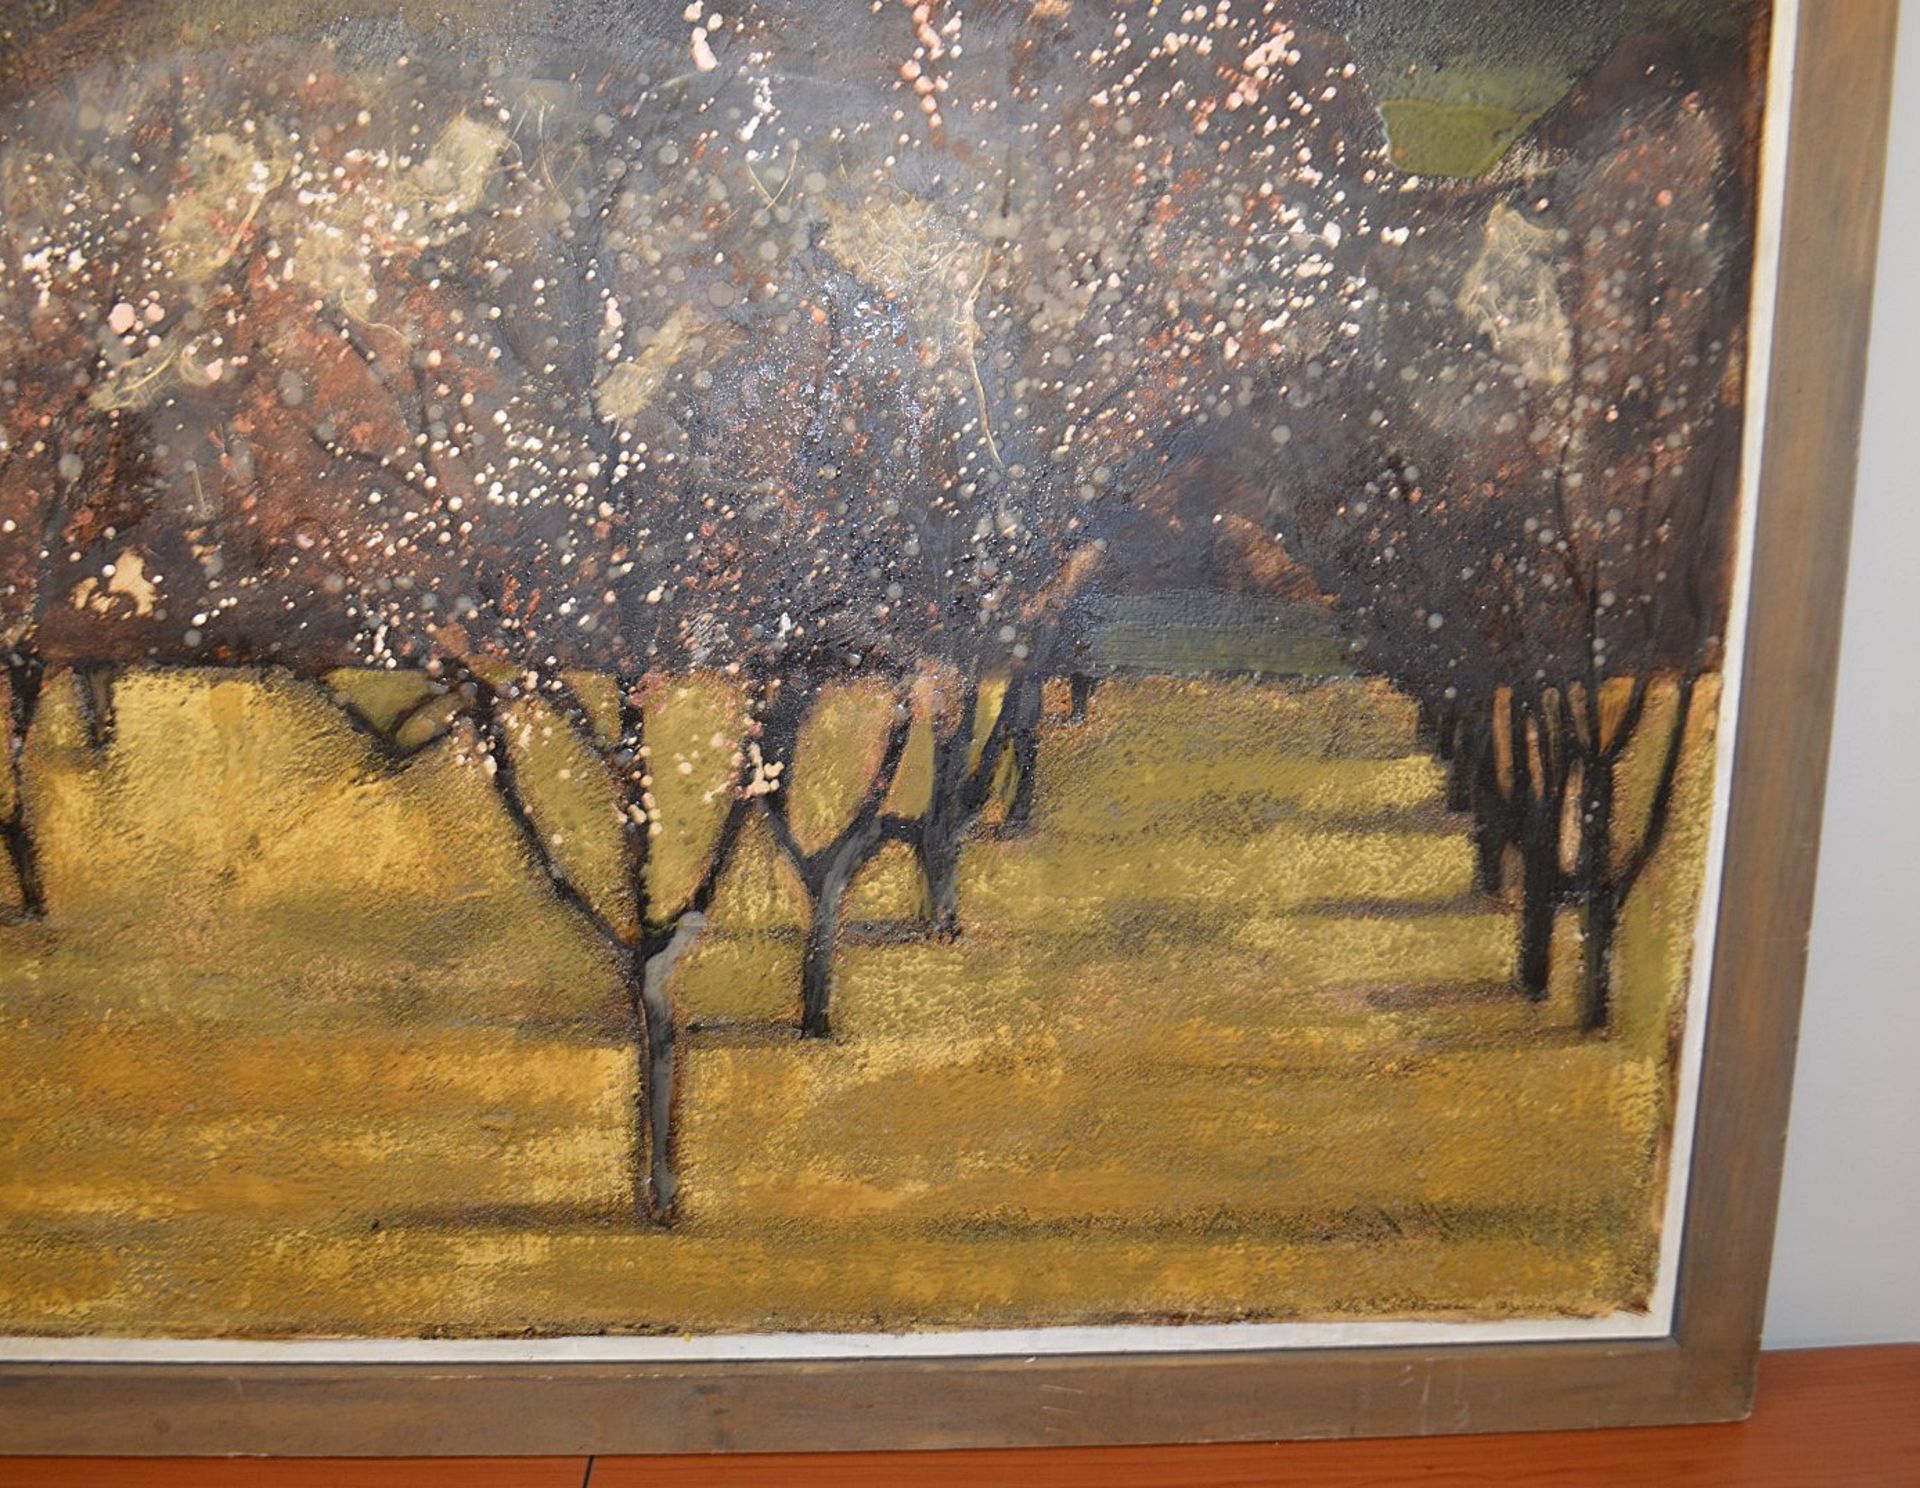 1 x Original Signed Framed Painting Of A Spanish Orchard By Lydia Bauman (1997) - Dimensions: 122 - Image 7 of 8